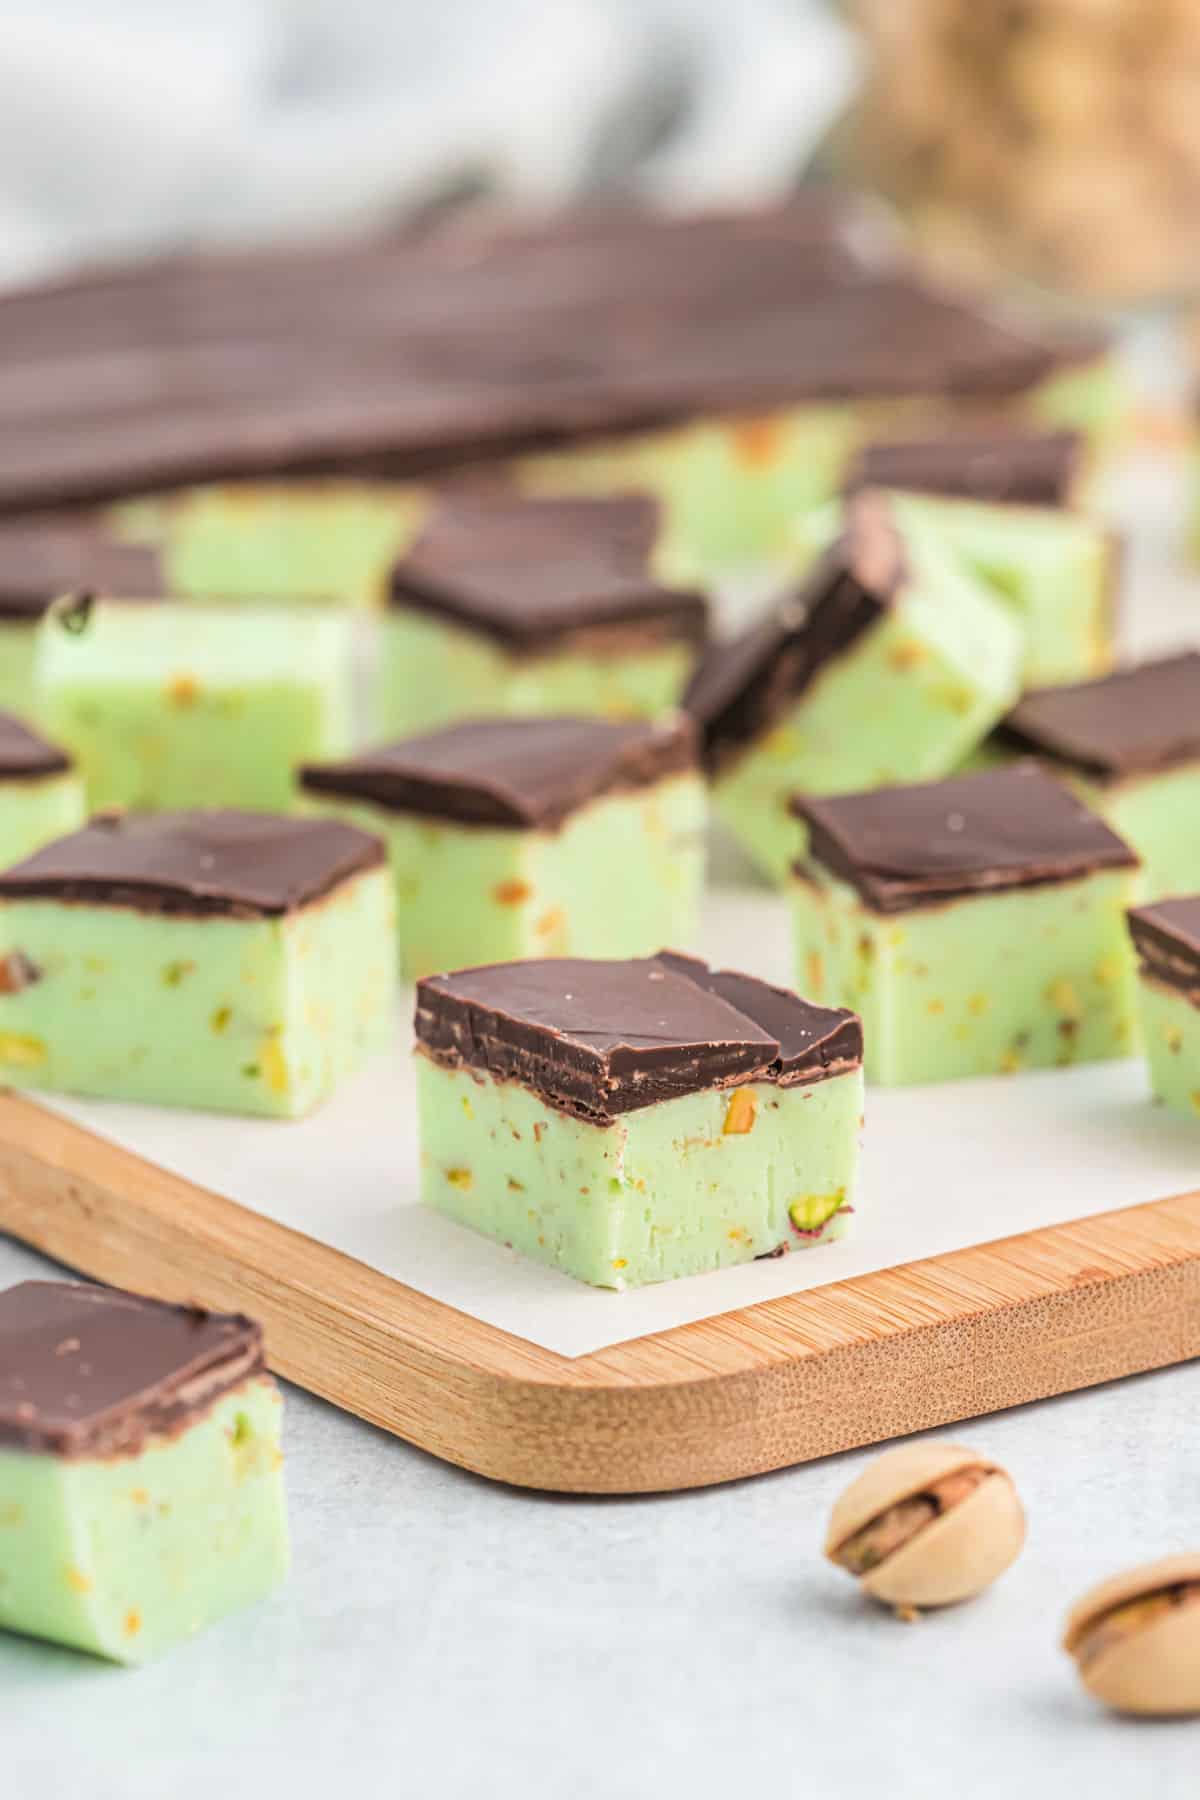 Pieces of pistachio fudge cut into squares on a cutting board.